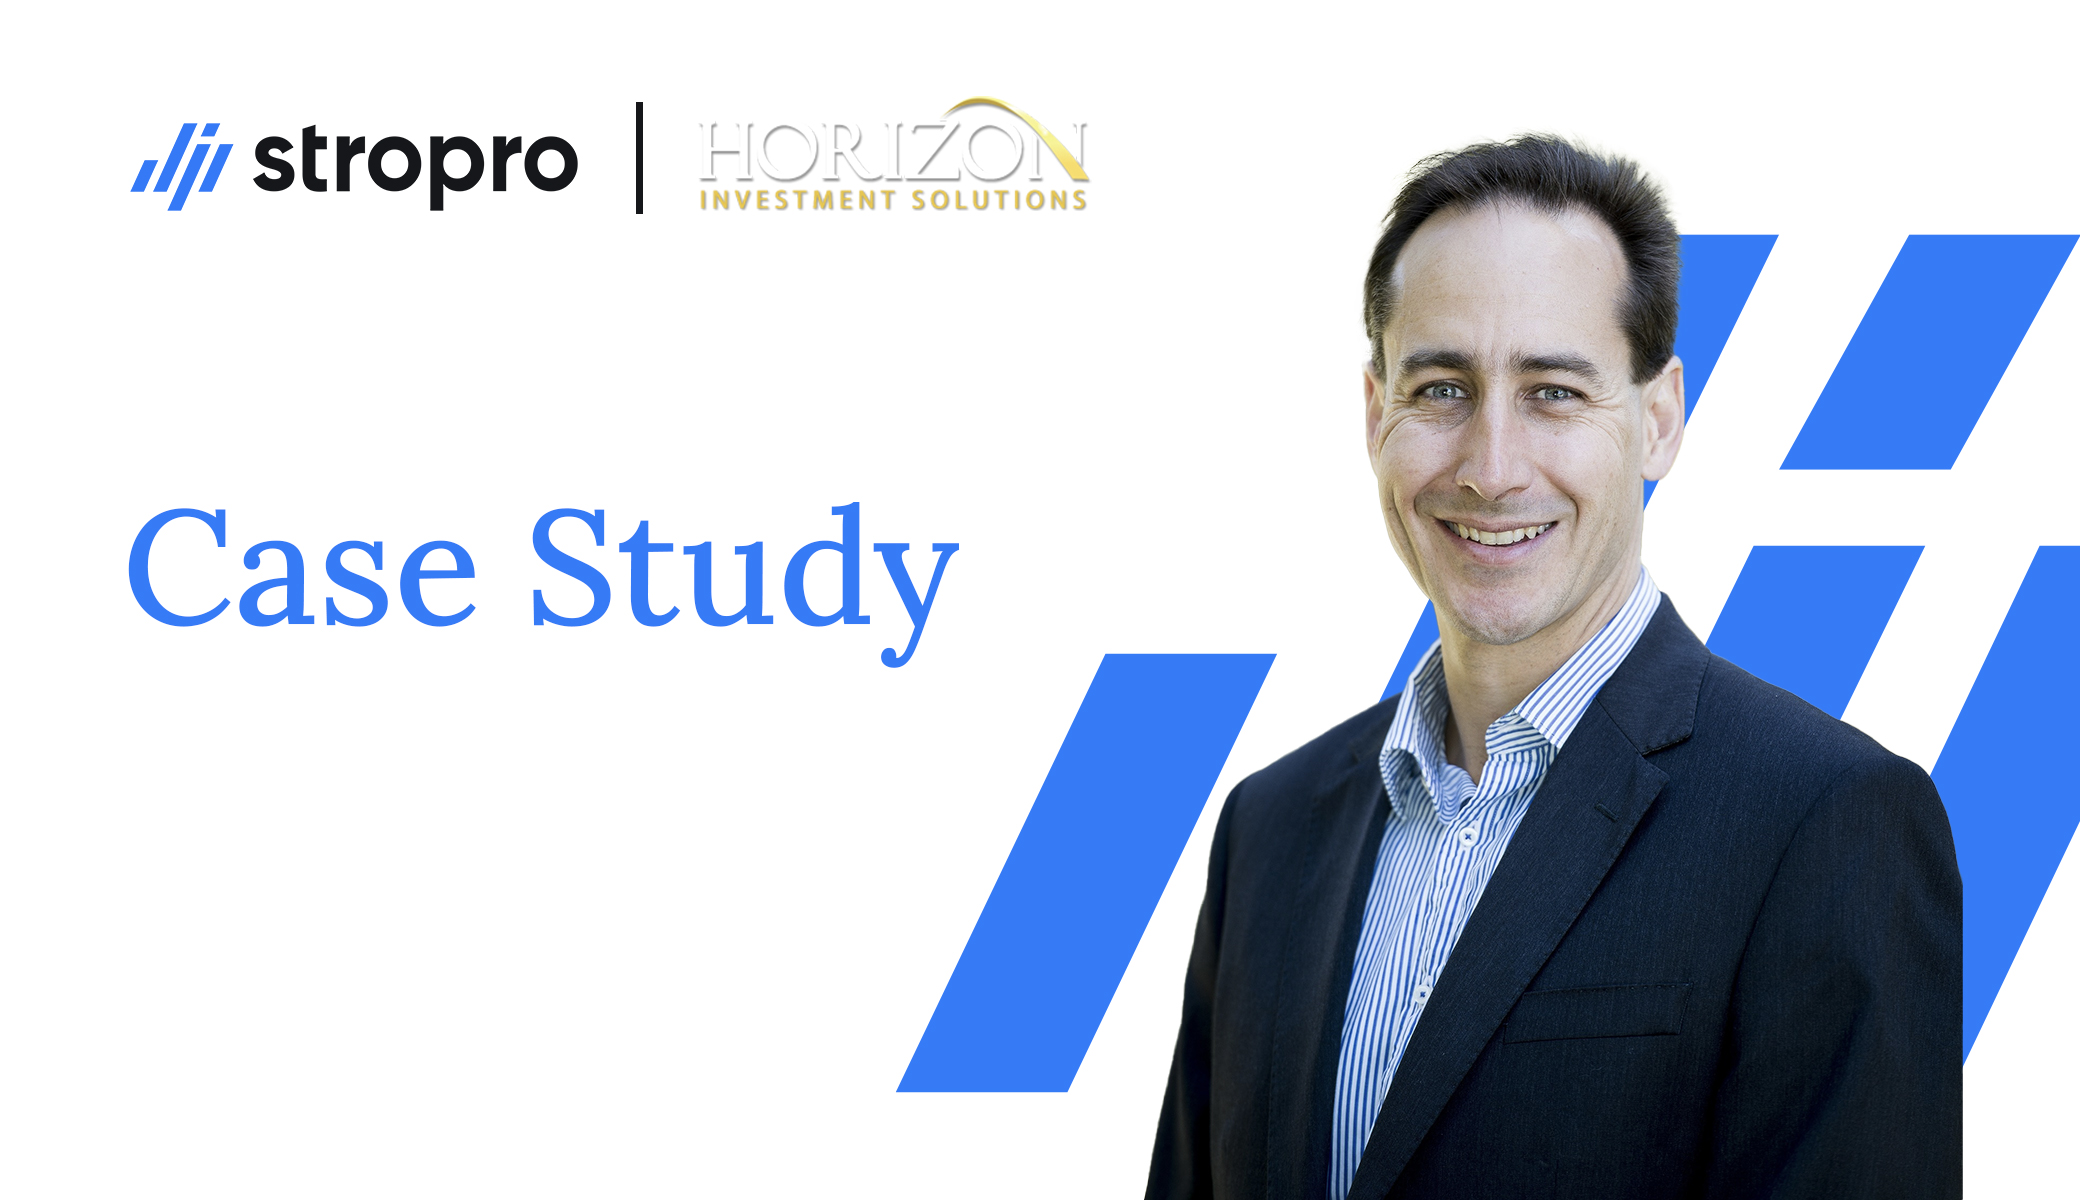 Stropro case study with David Offer